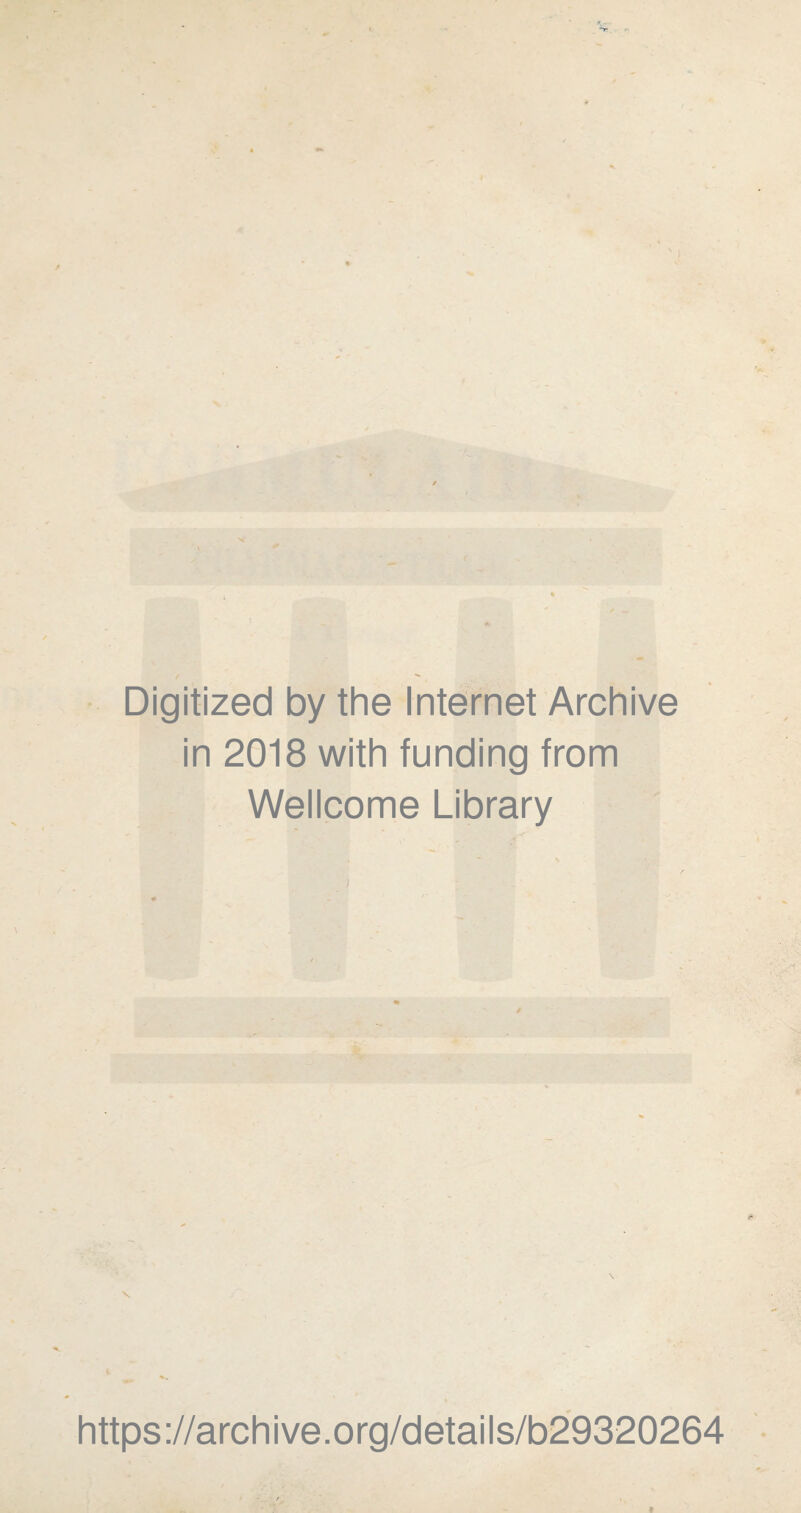 Digitized by the Internet Archive in 2018 with funding from Wellcome Library https://archive.org/details/b29320264